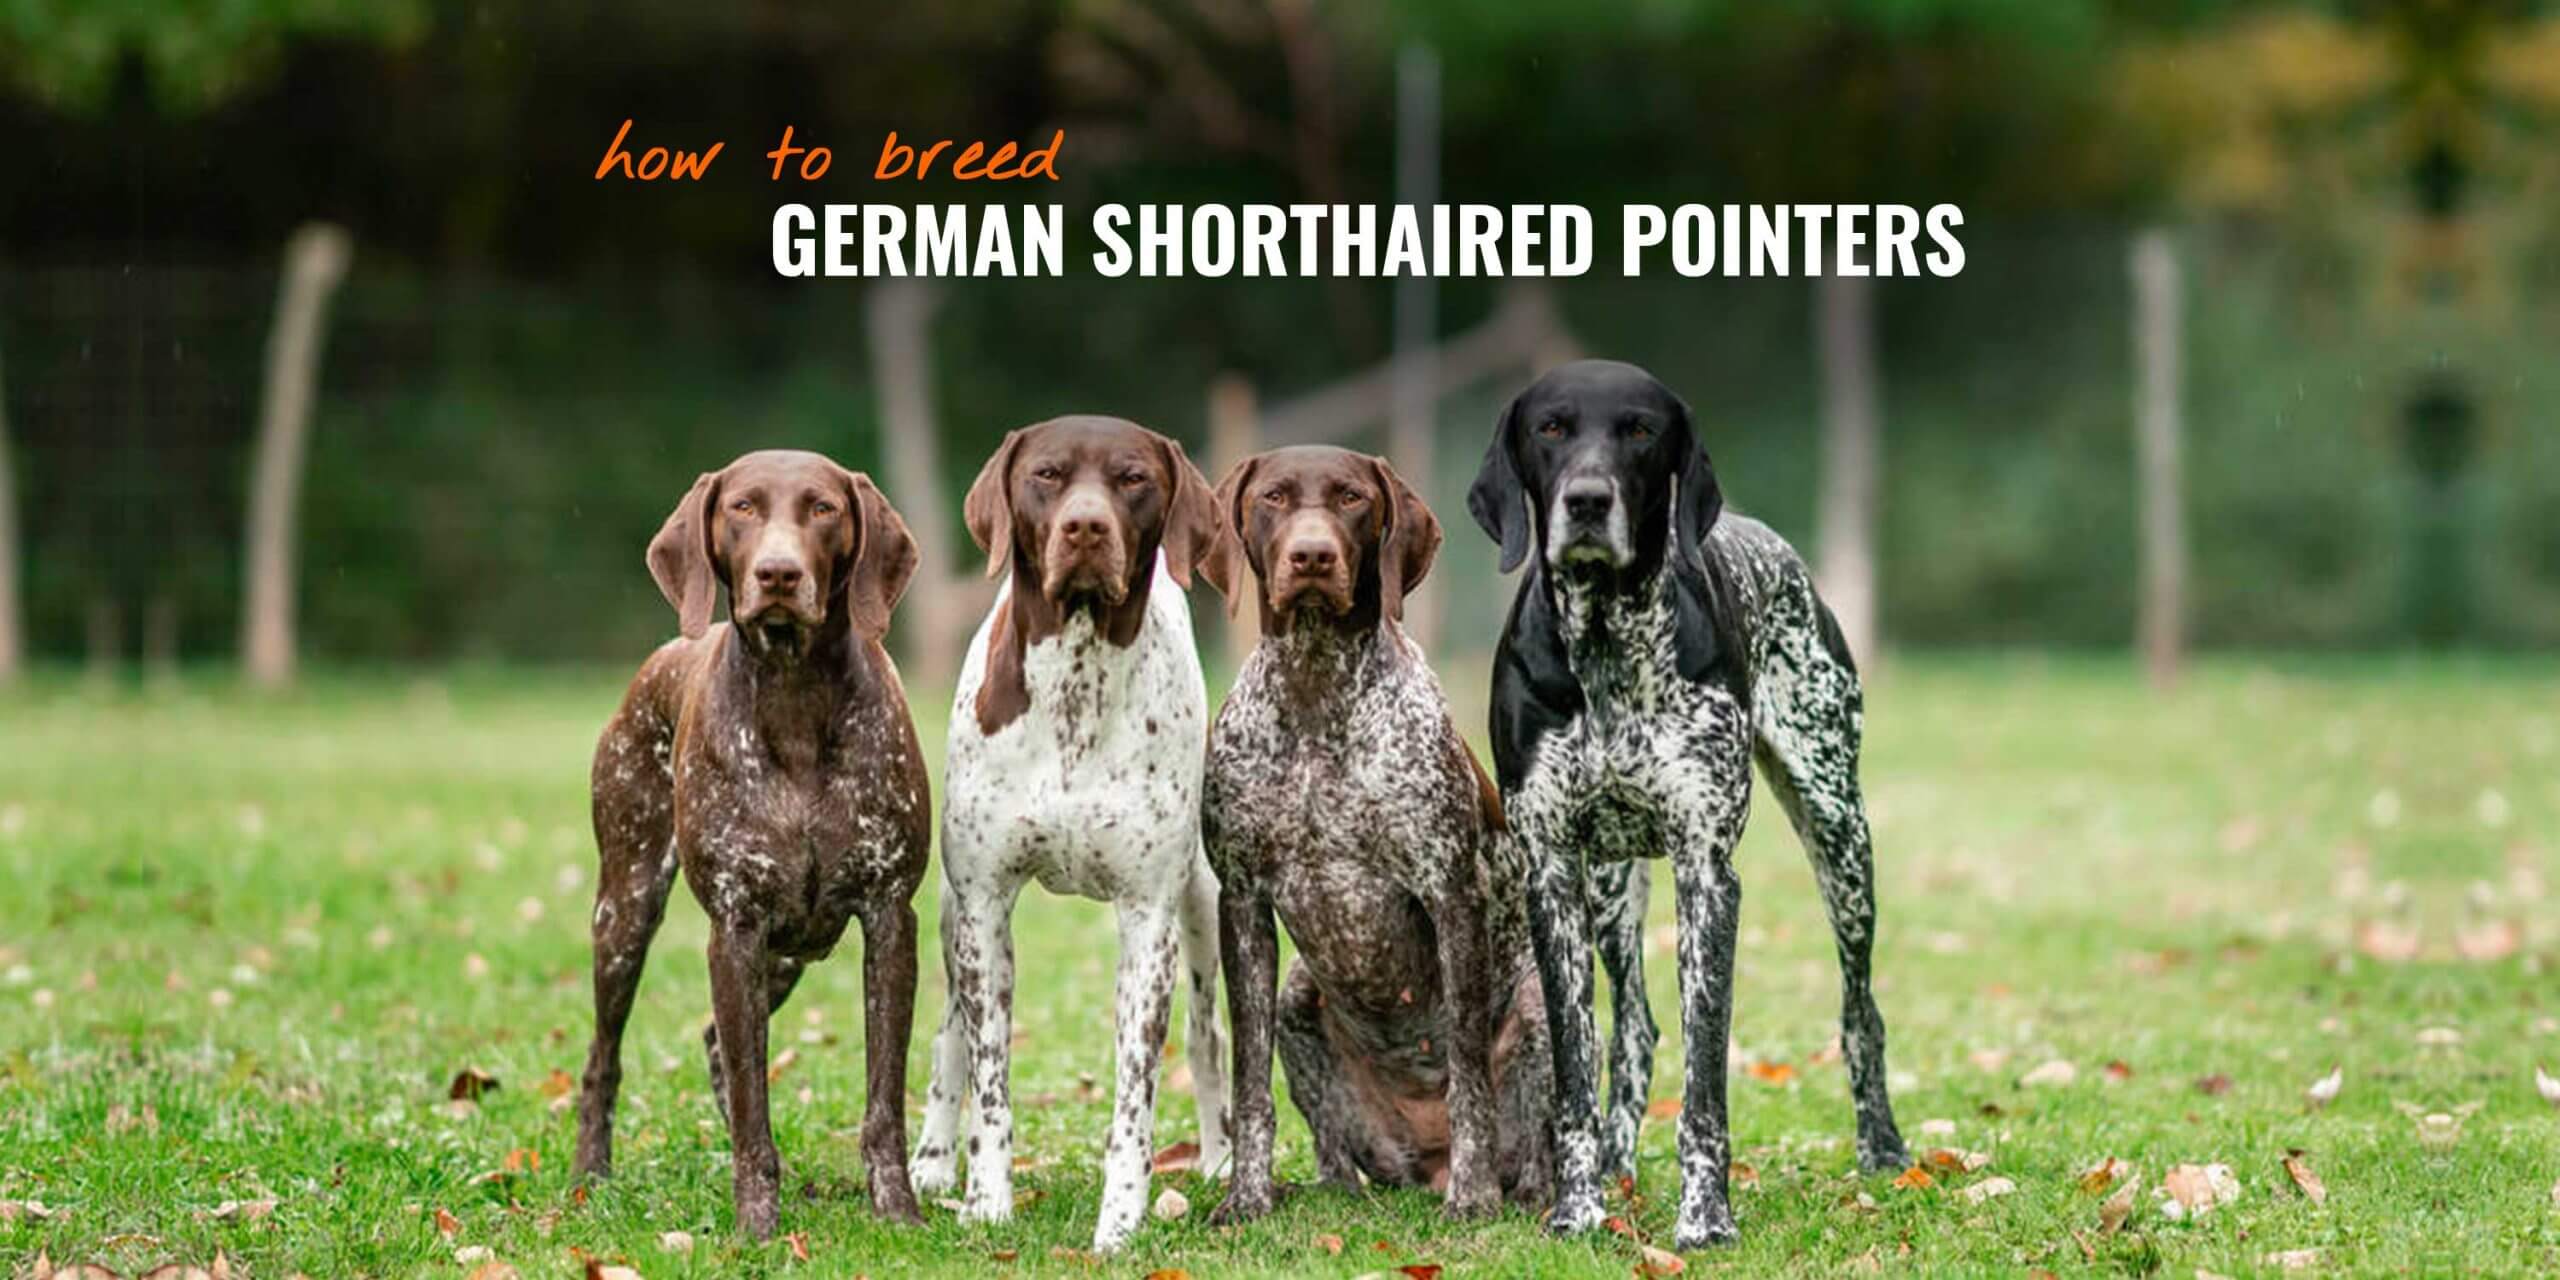 How To Breed German Shorthaired Pointers